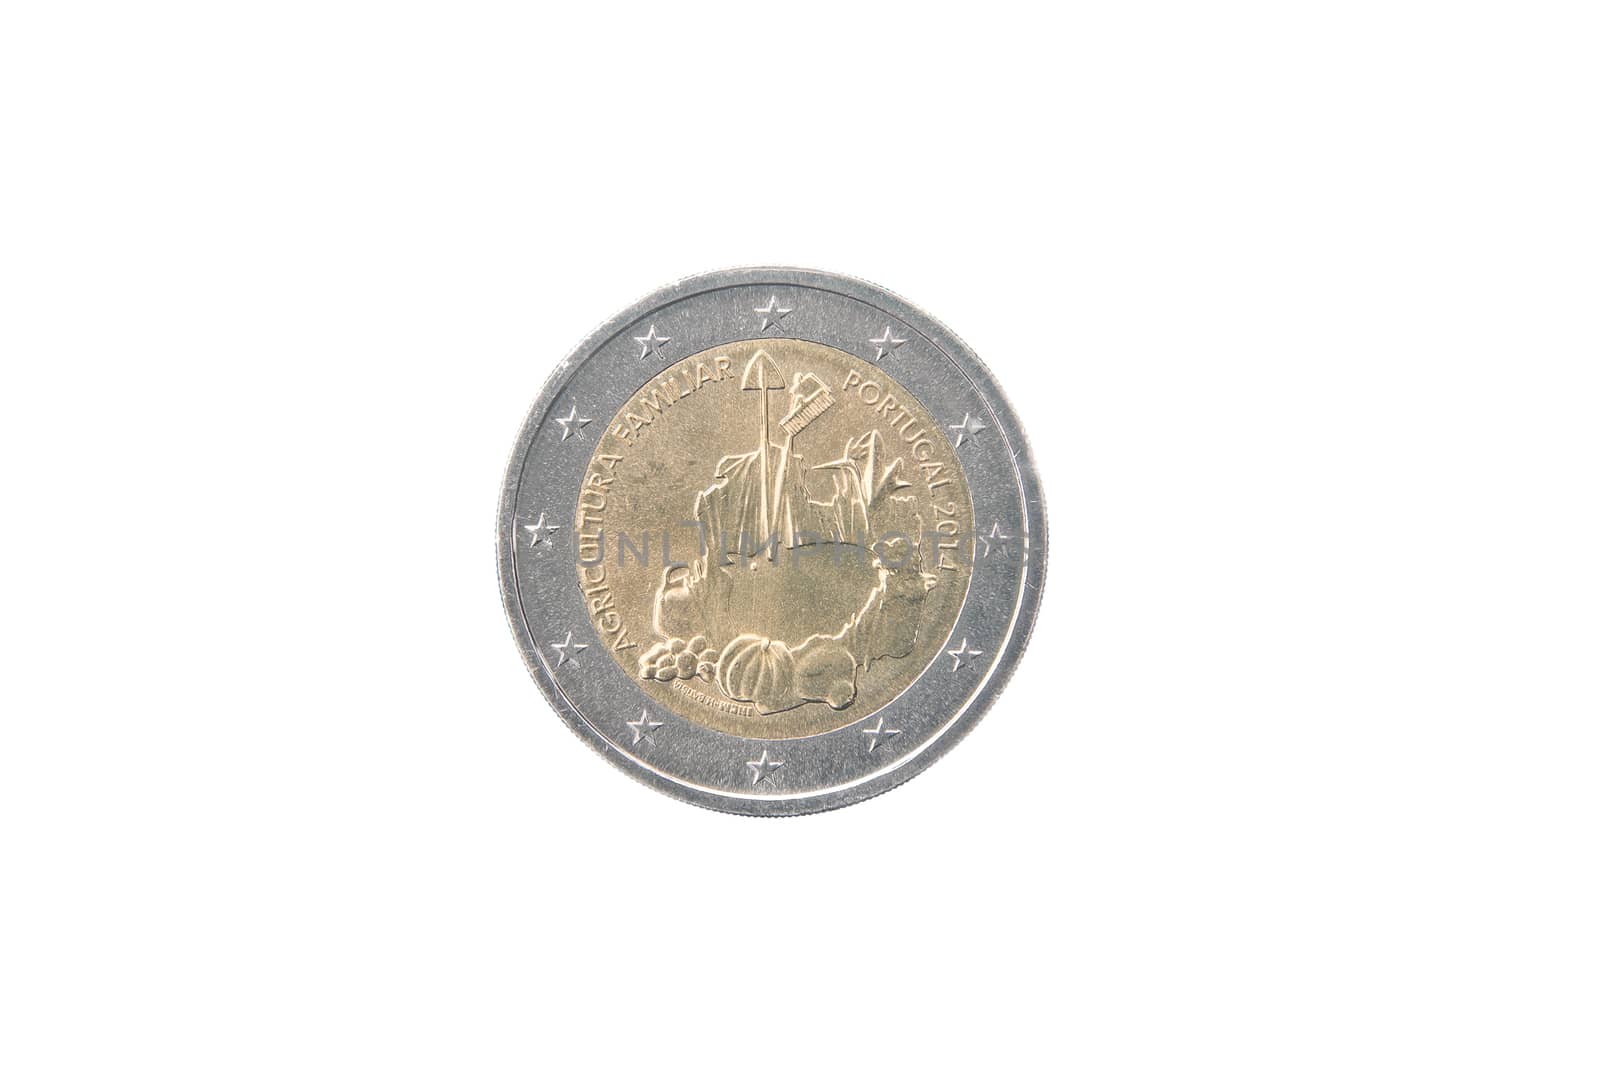 Commemorative coin of Portugal minted in 2014 isolated on white